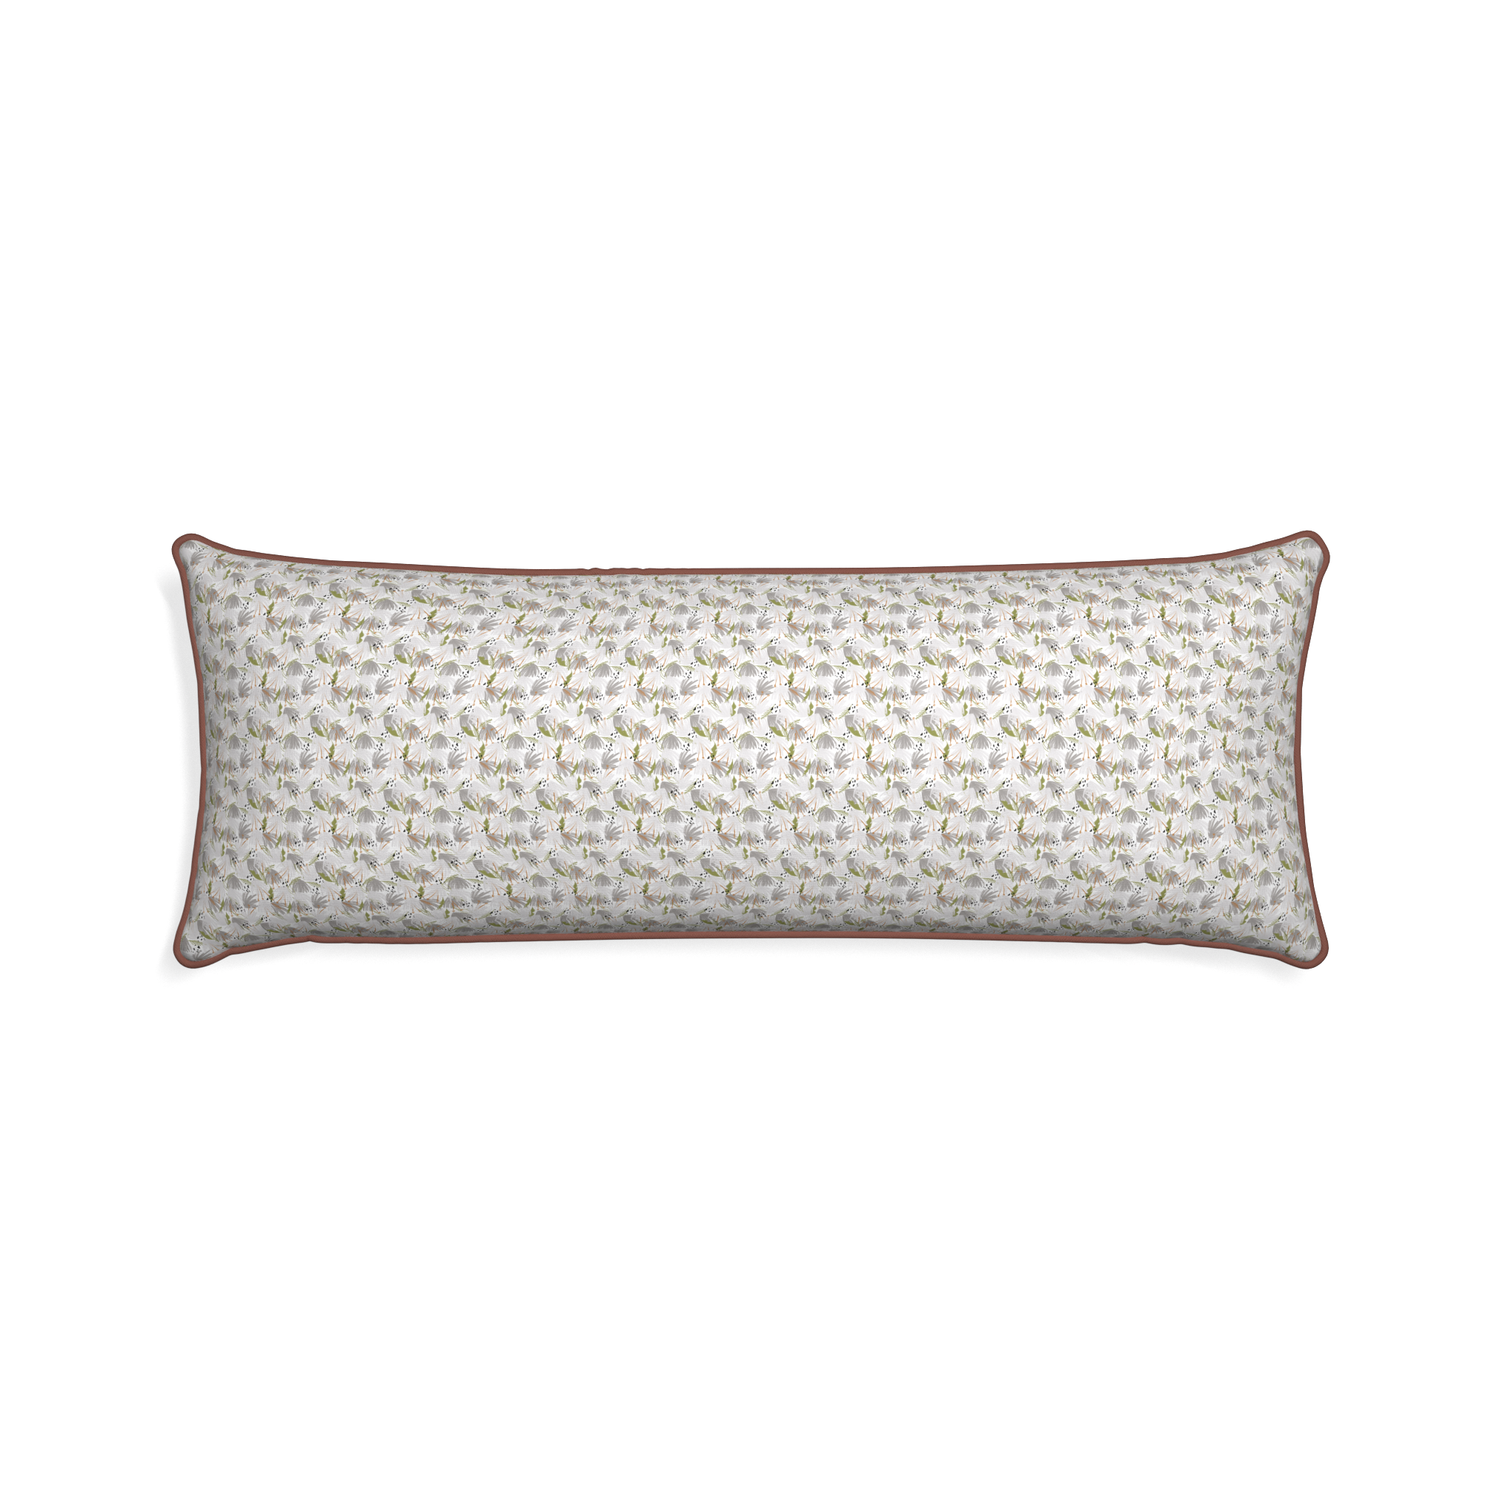 Xl-lumbar eden grey custom pillow with w piping on white background